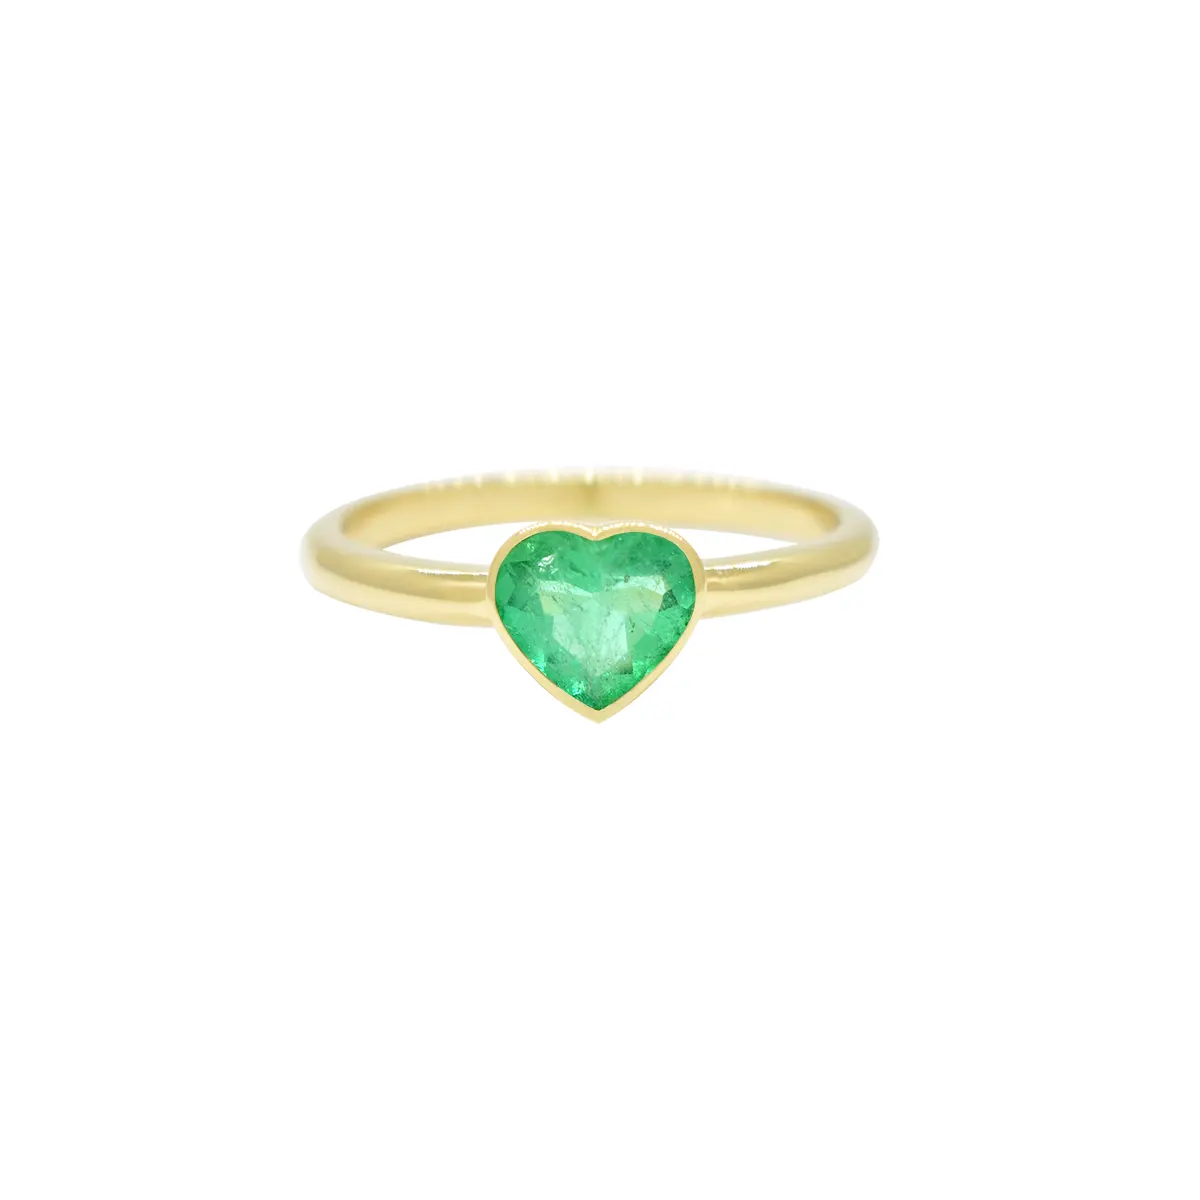 This solitaire ring features smooth lines and a serene green color from the heart shape emerald that is perfectly framed in a polished bezel